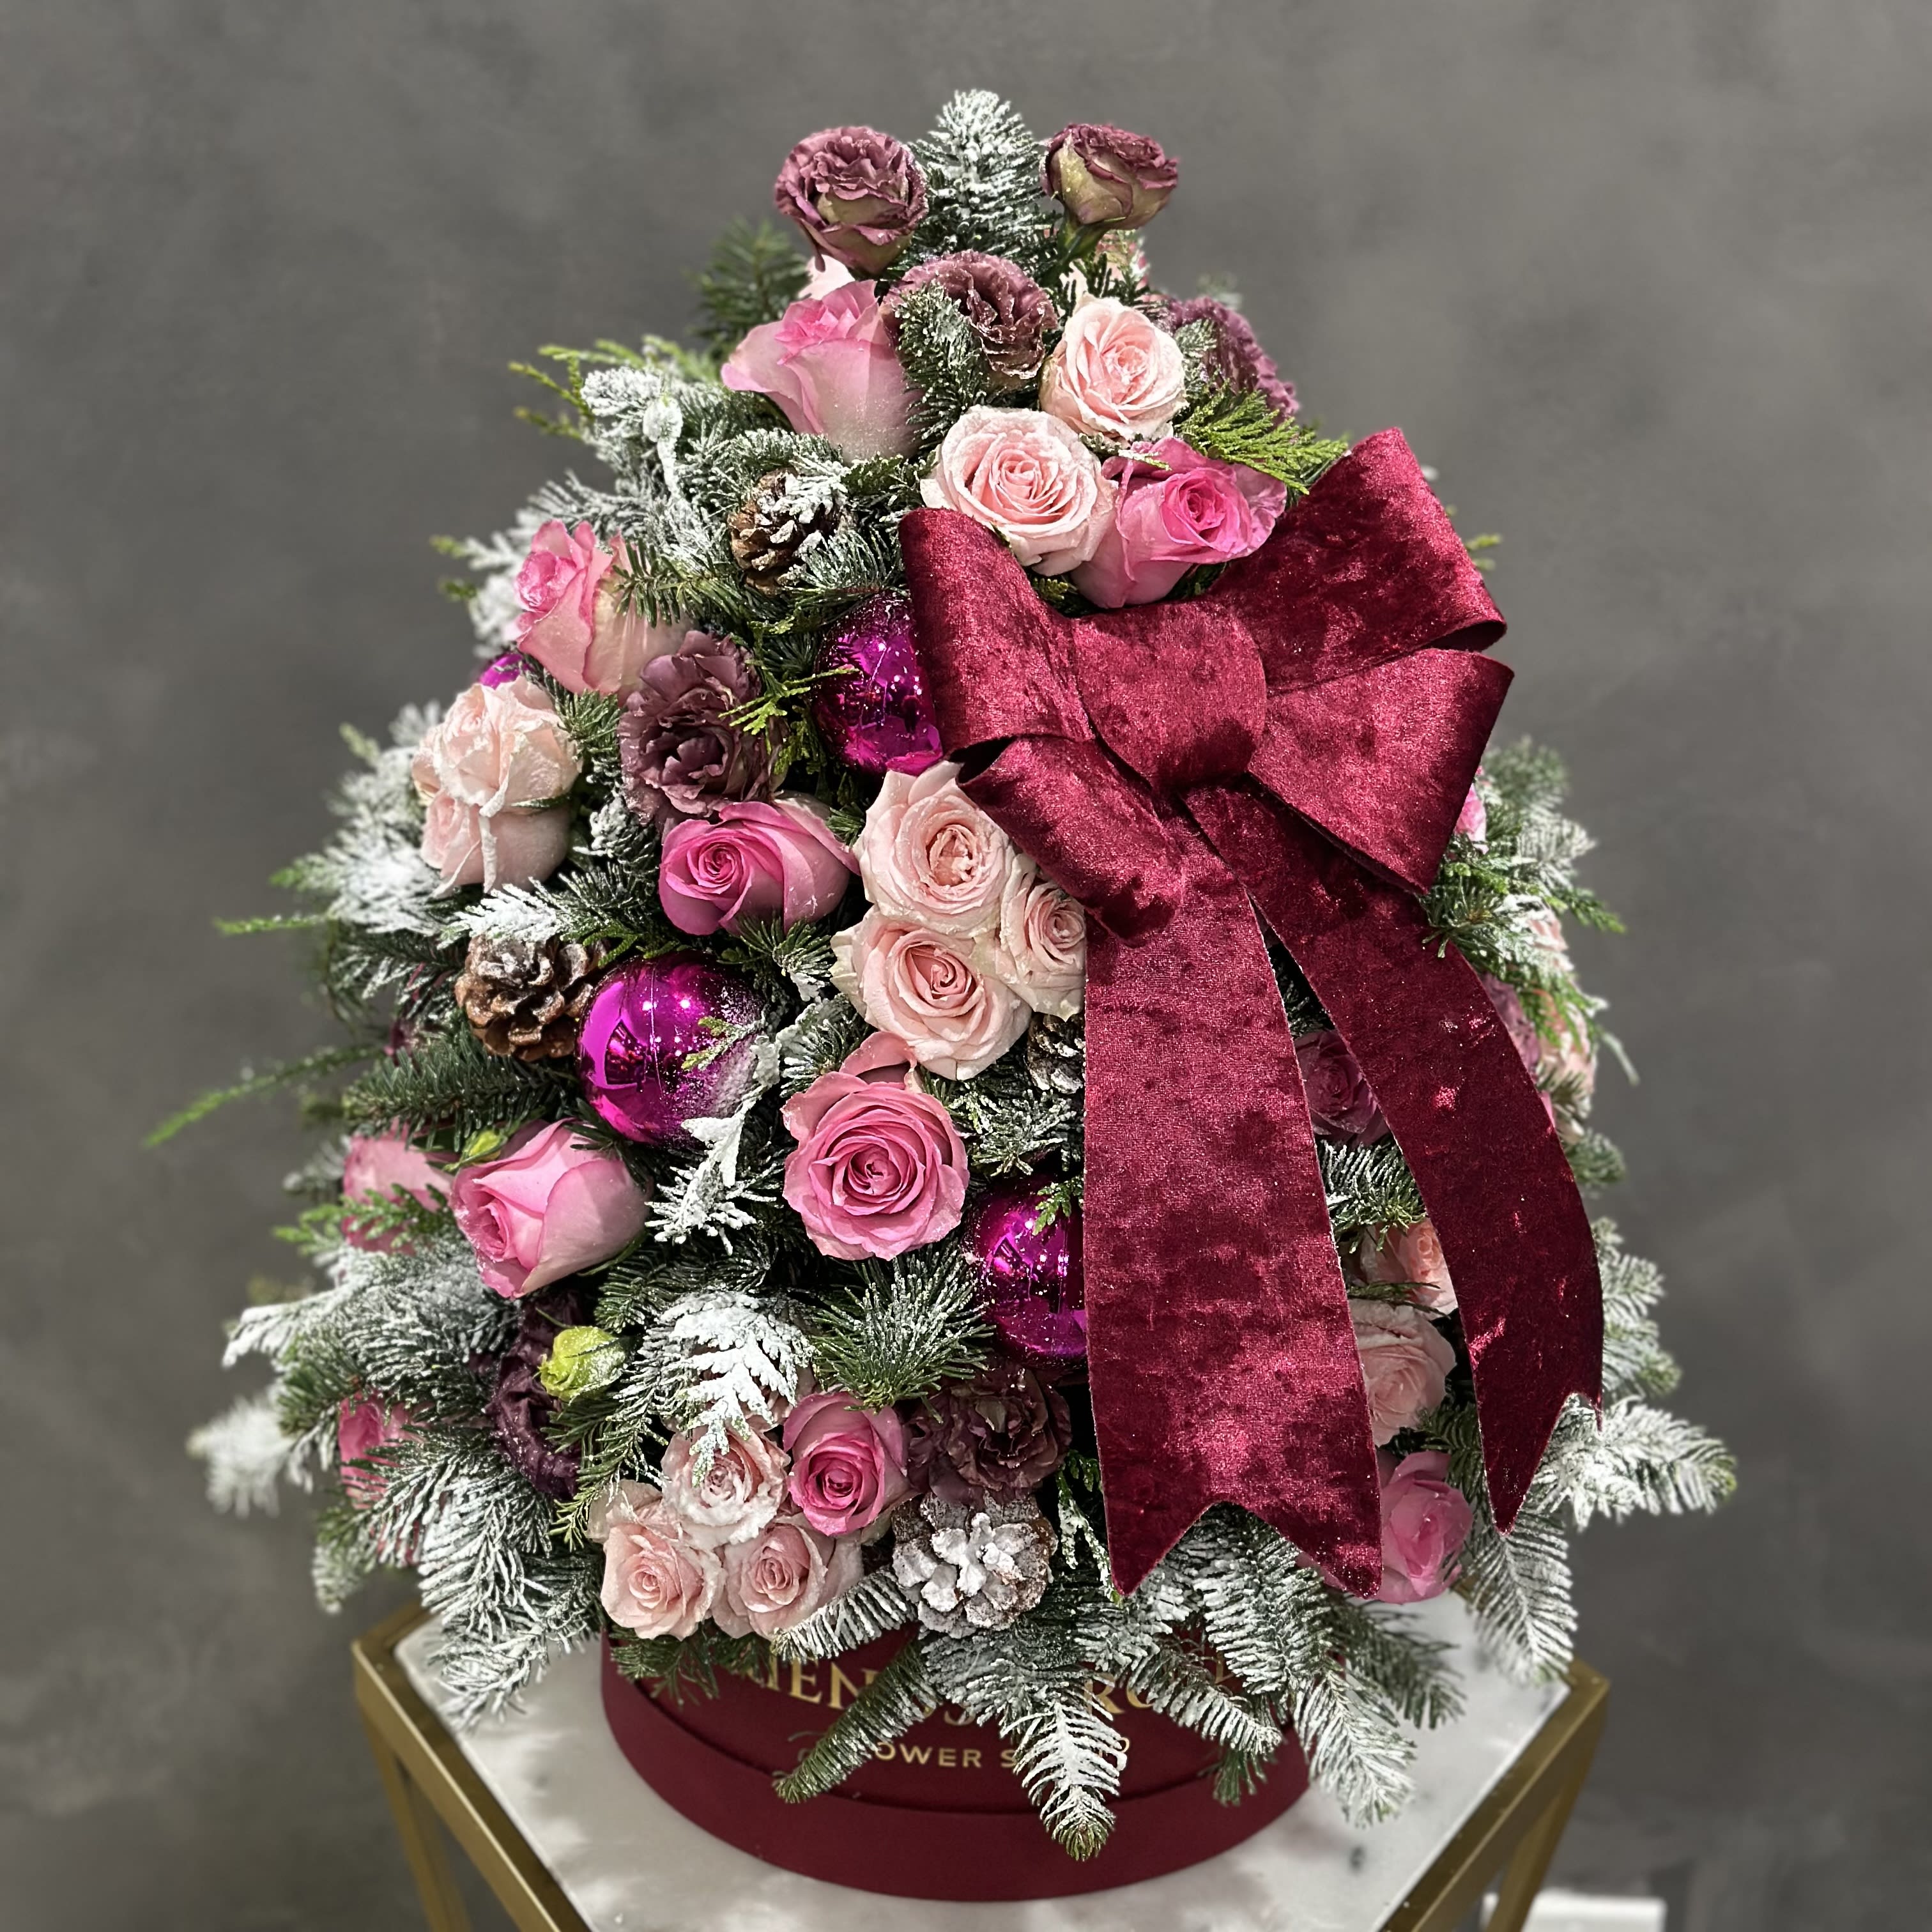 Anastasia - A beautiful Christmas tree arrangement in our flat cherry box ,filled with Christmas branches, fresh flowers, and holiday ornaments. Great gift for your friends and family or home decoration